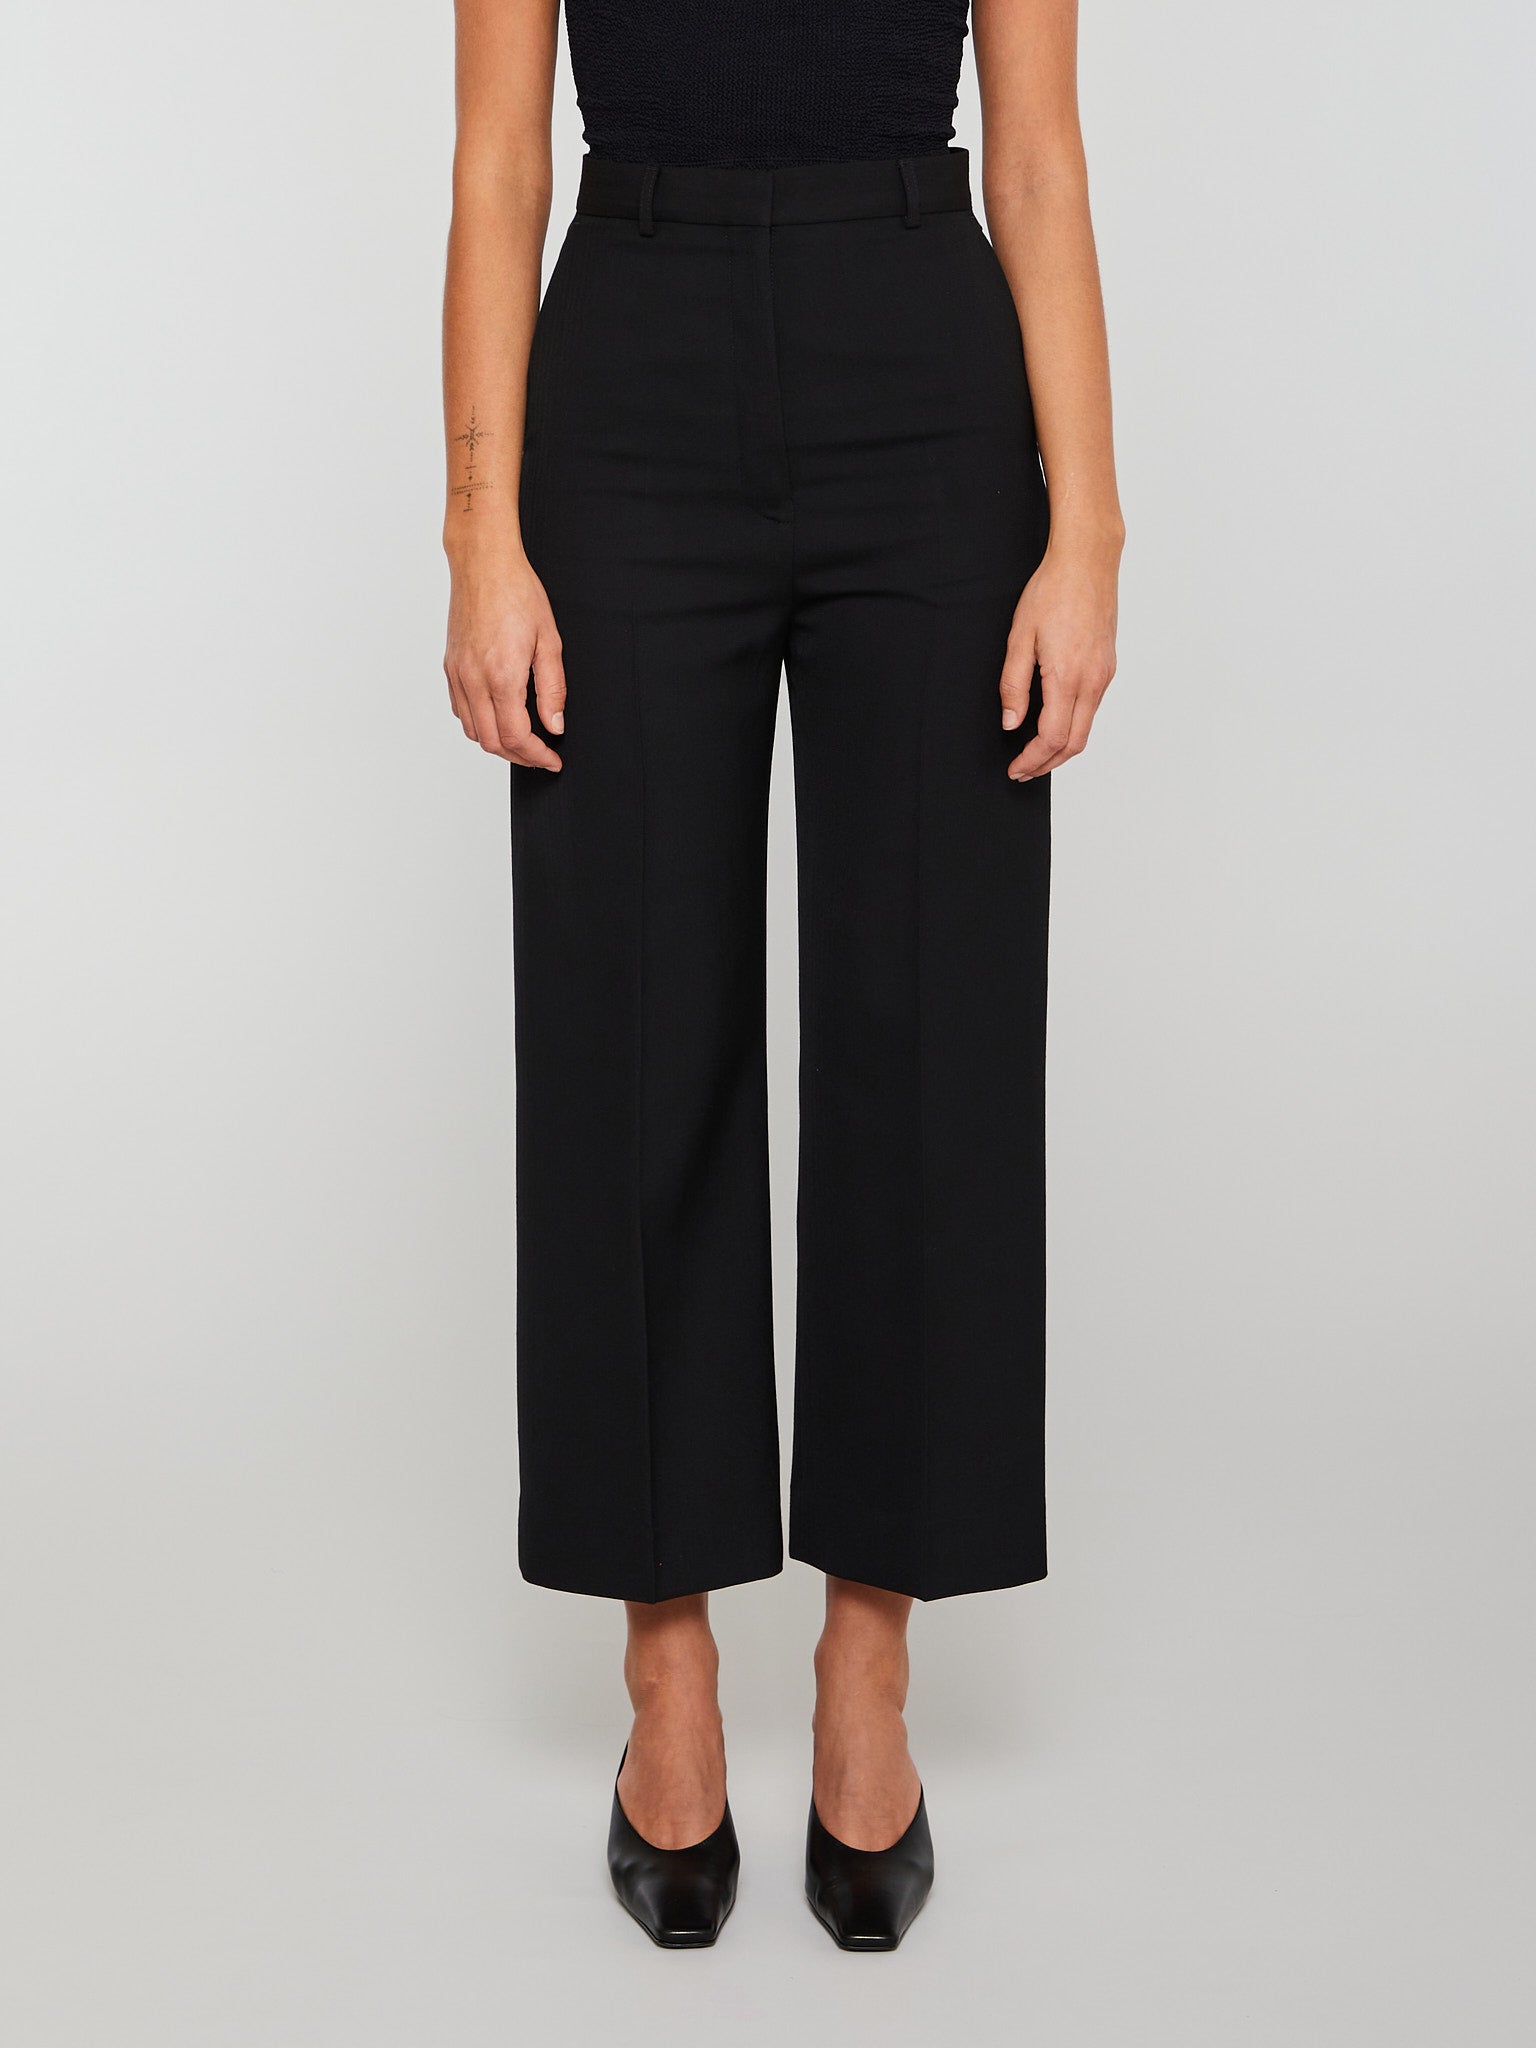 Acne Studios - Relaxed Tailored Trousers in Black